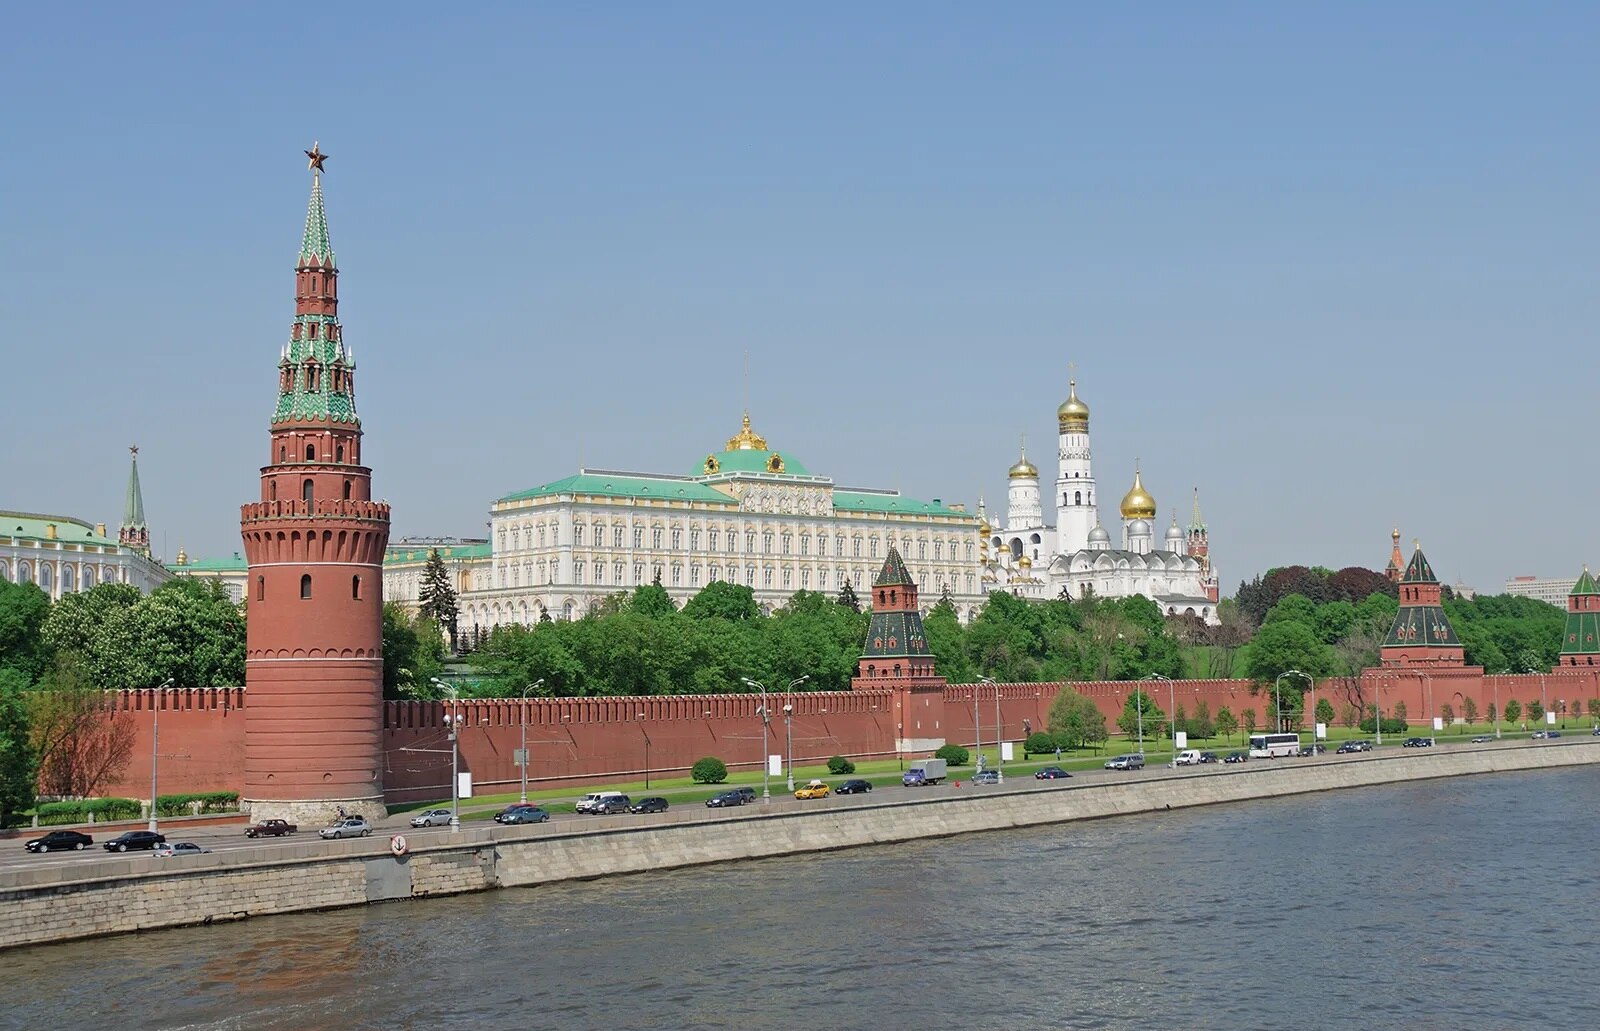 19-facts-about-the-kremlin